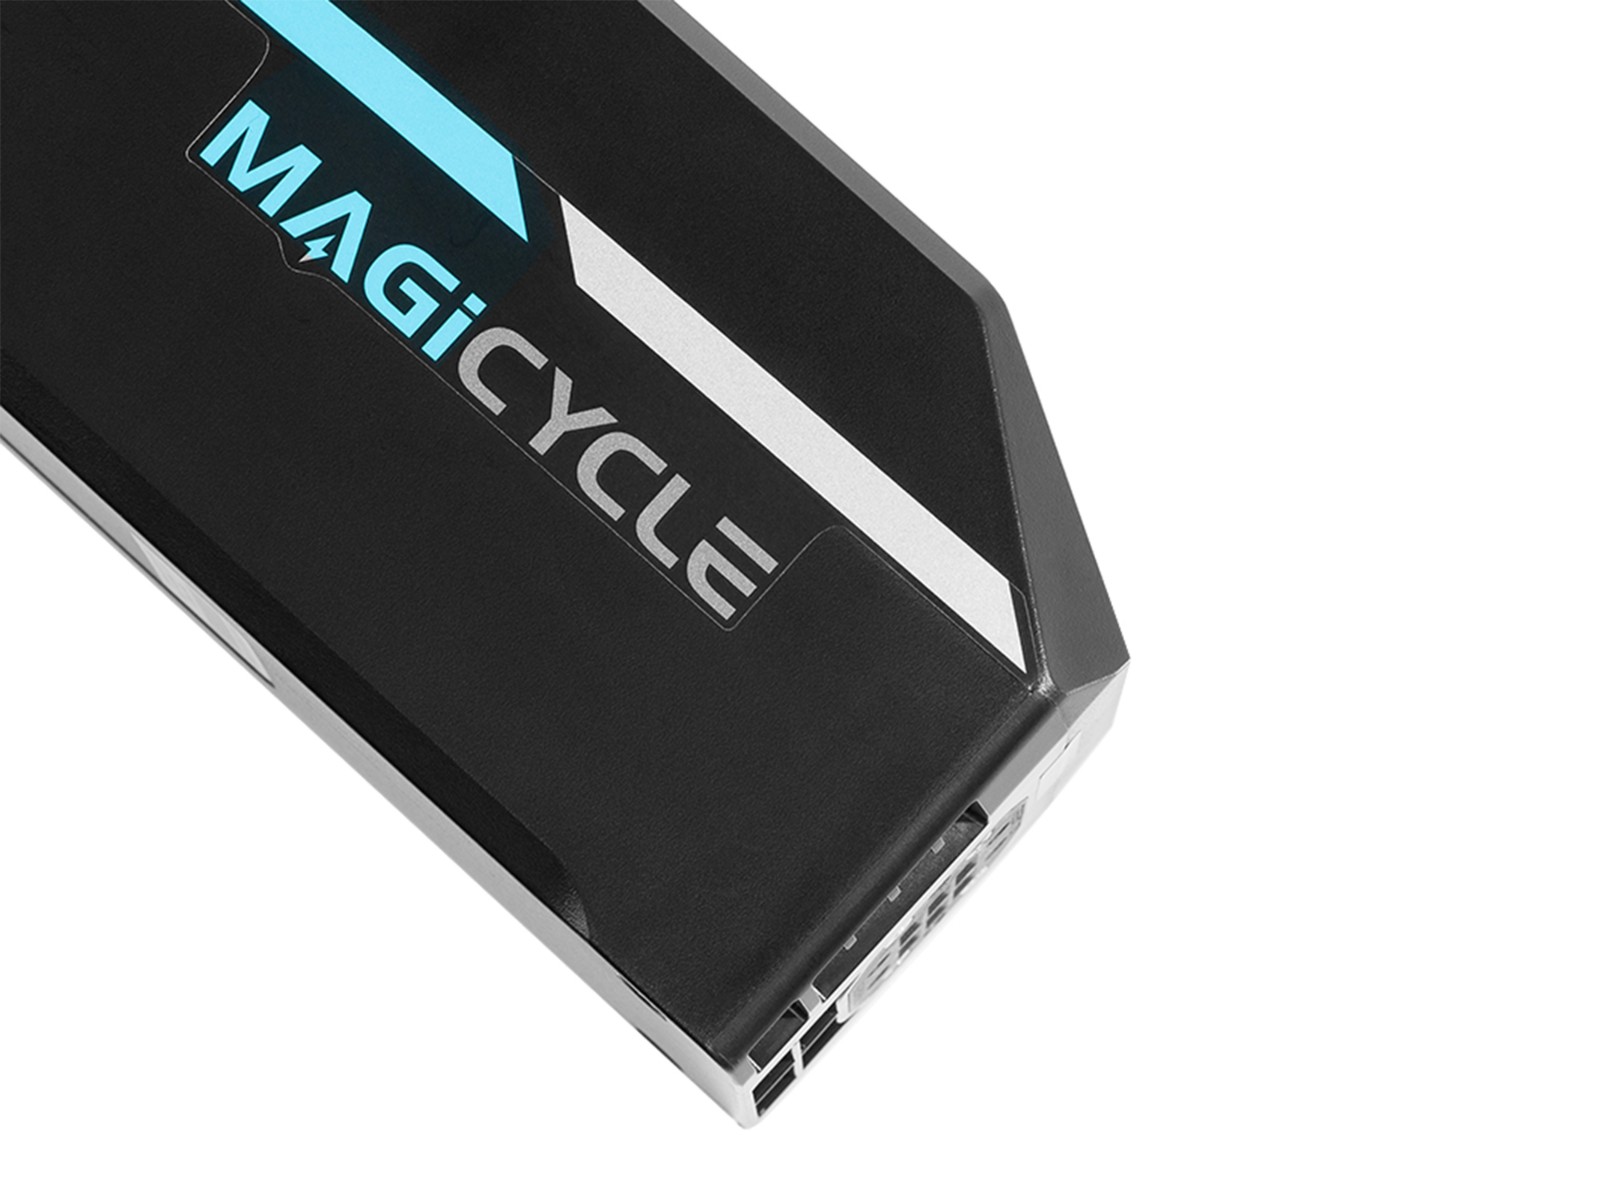 Magicycle Cruiser/Cruiser Pro E-bike Battery - Canada Only